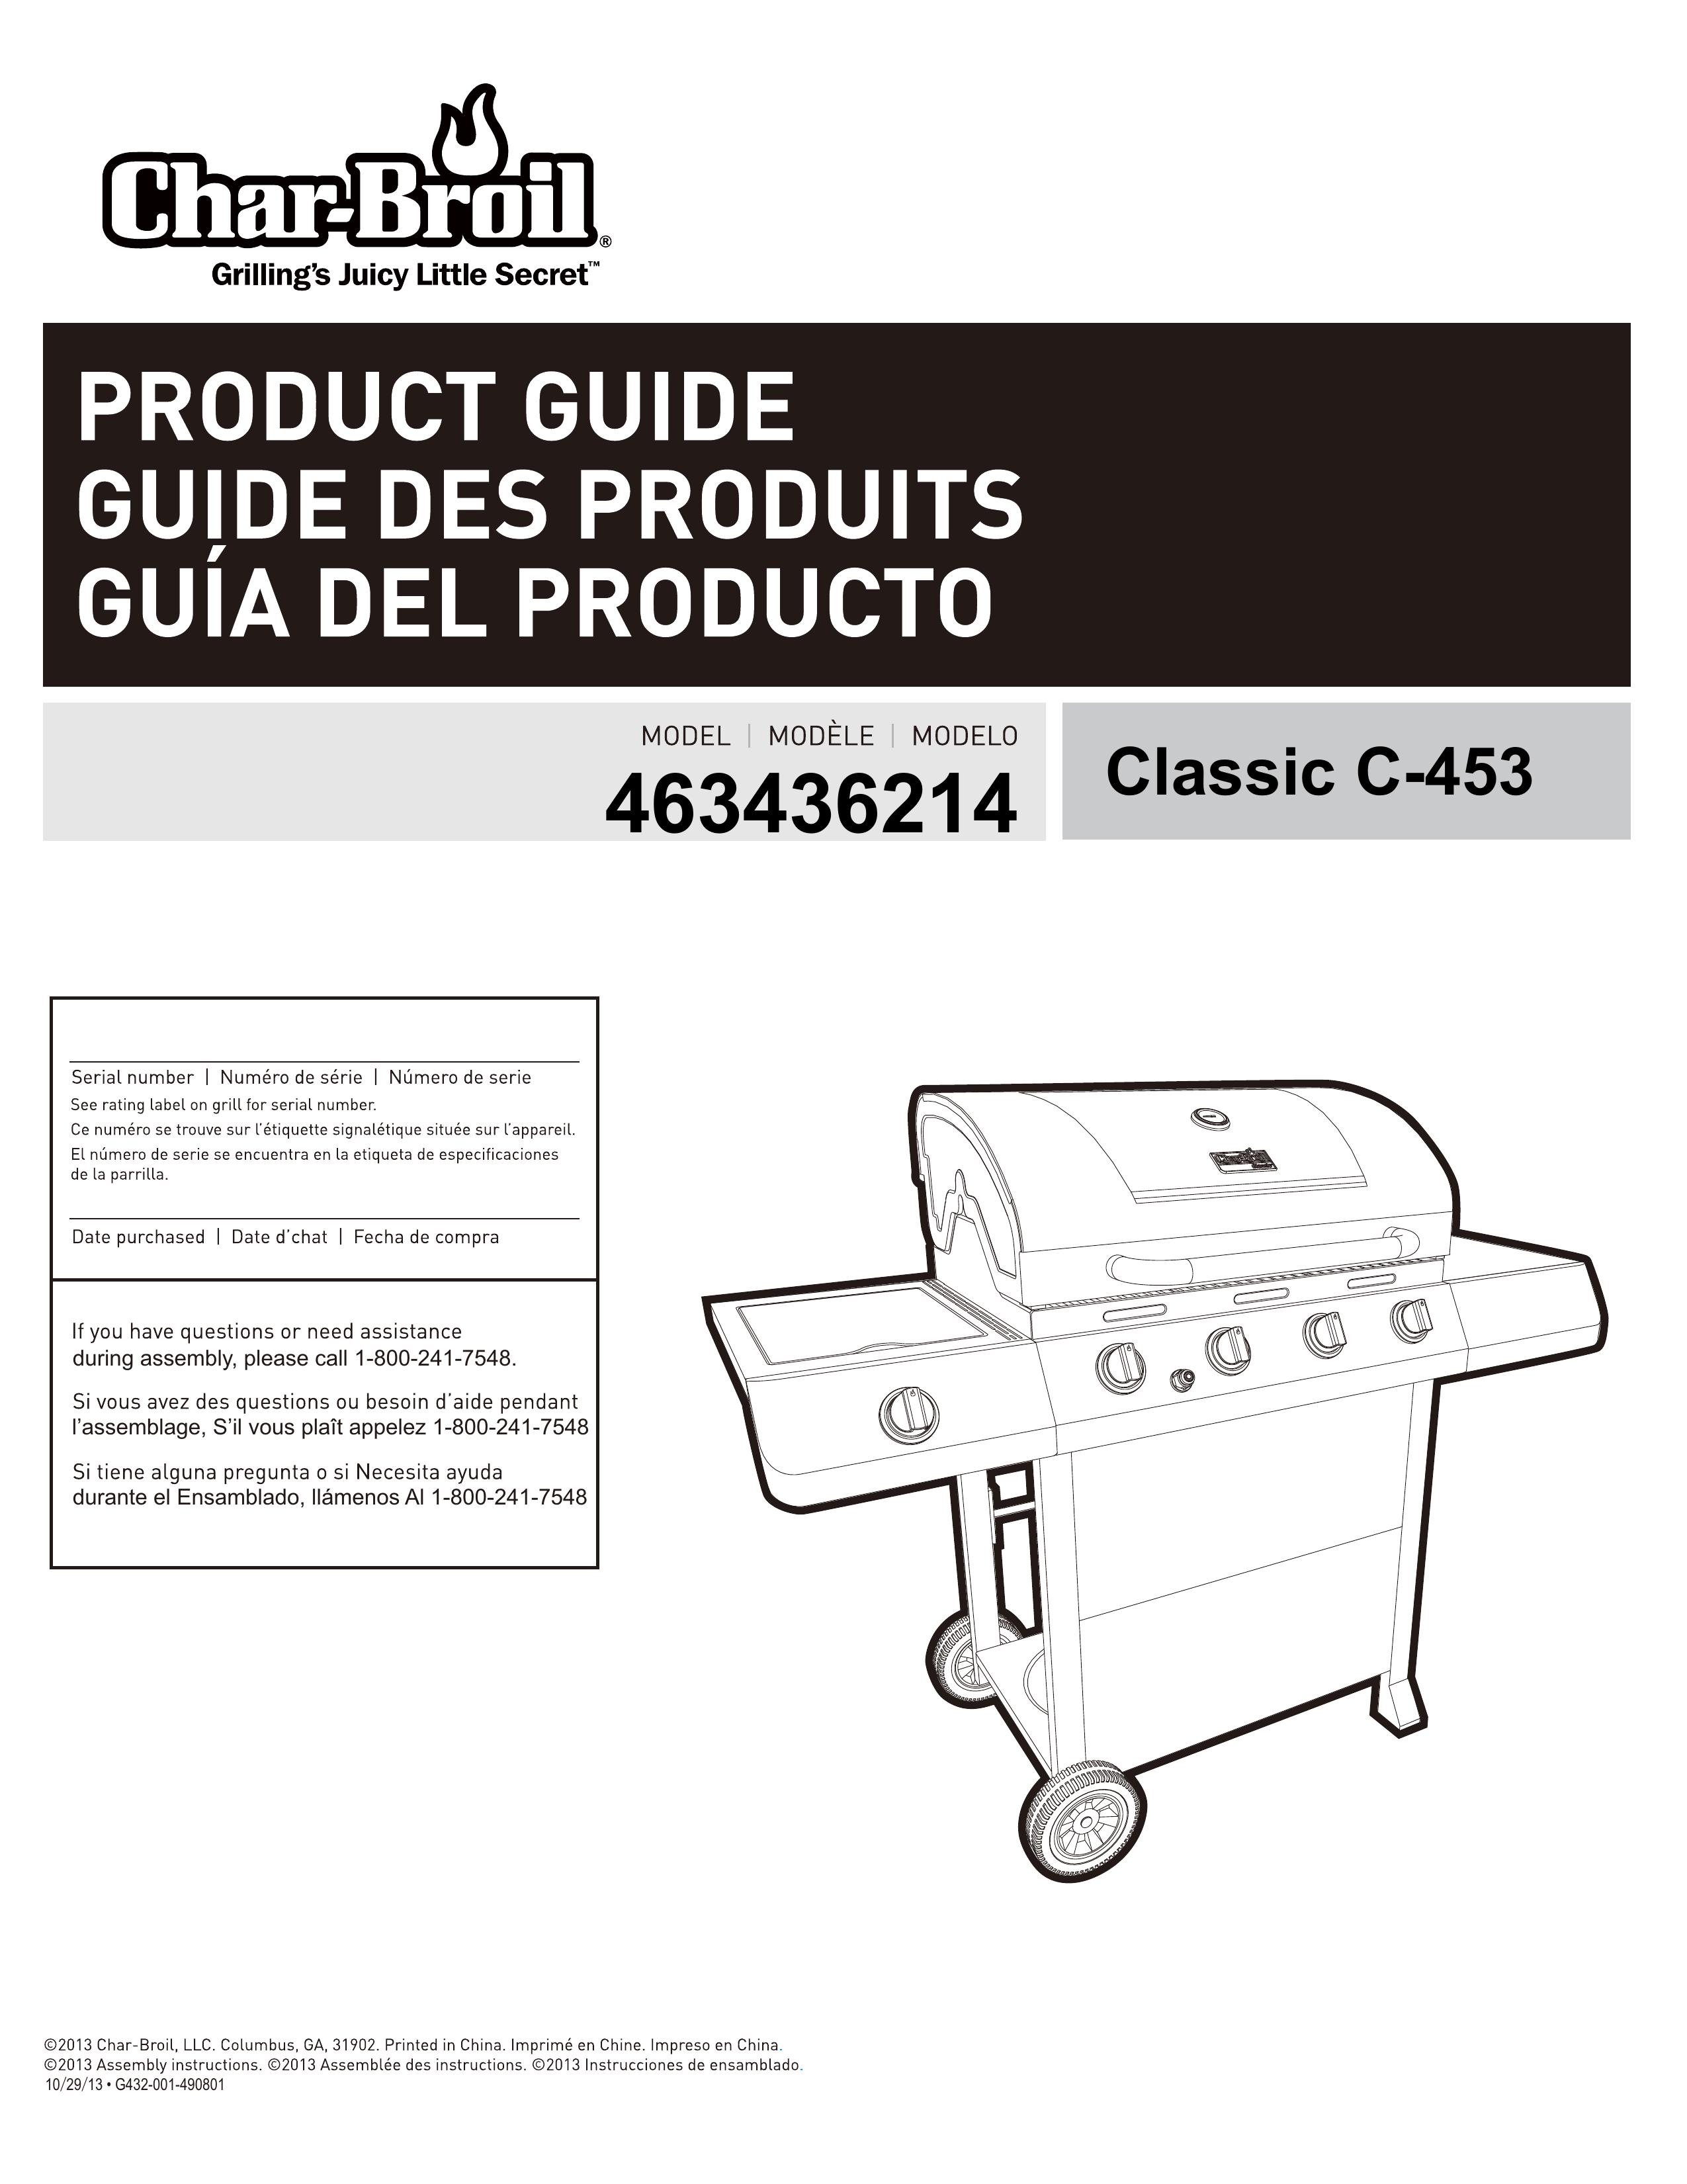 Char-Broil 463436214 Gas Grill User Manual